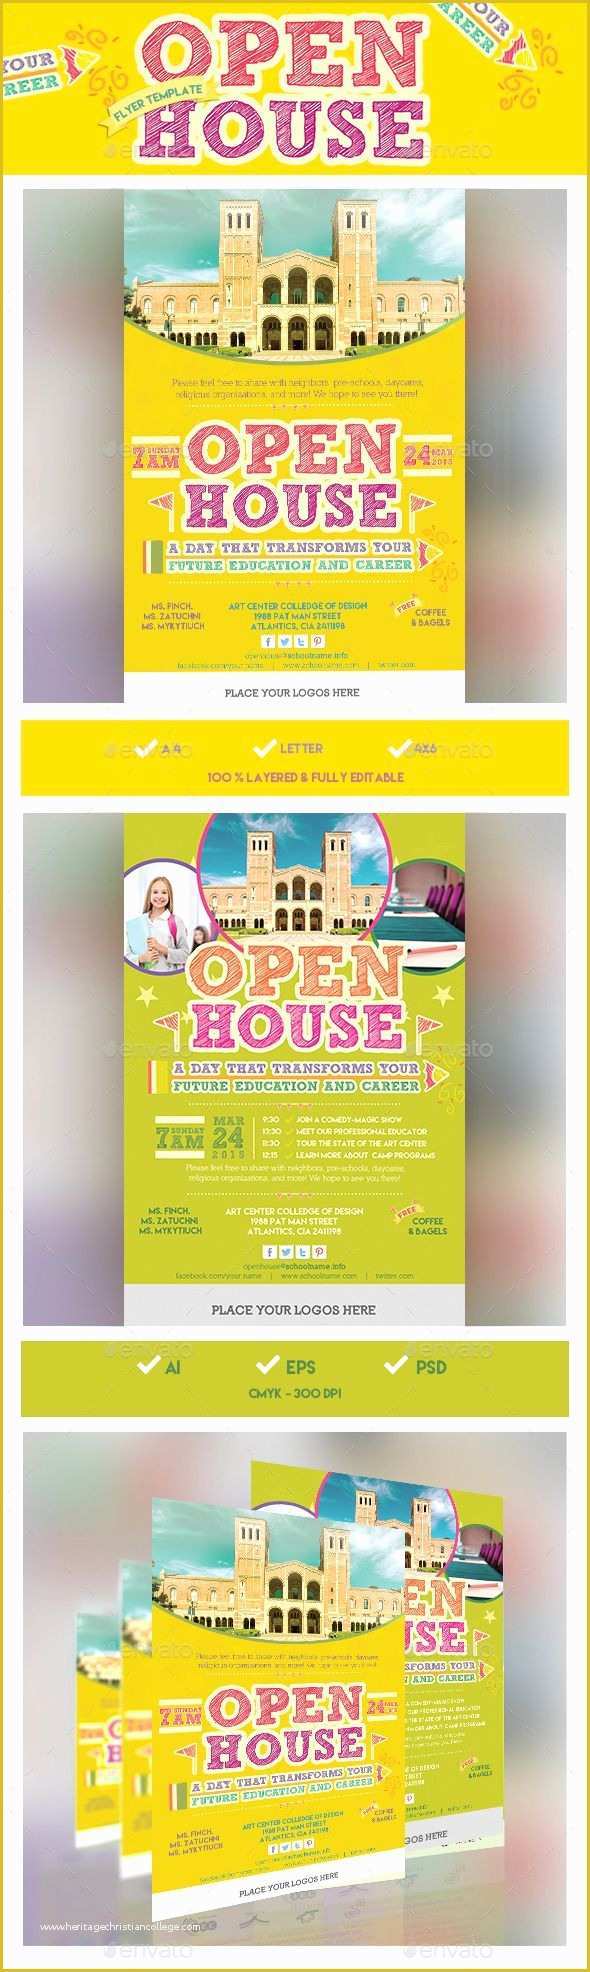 School Open House Flyer Template Free Of 1000 Ideas About Open House Invitation On Pinterest